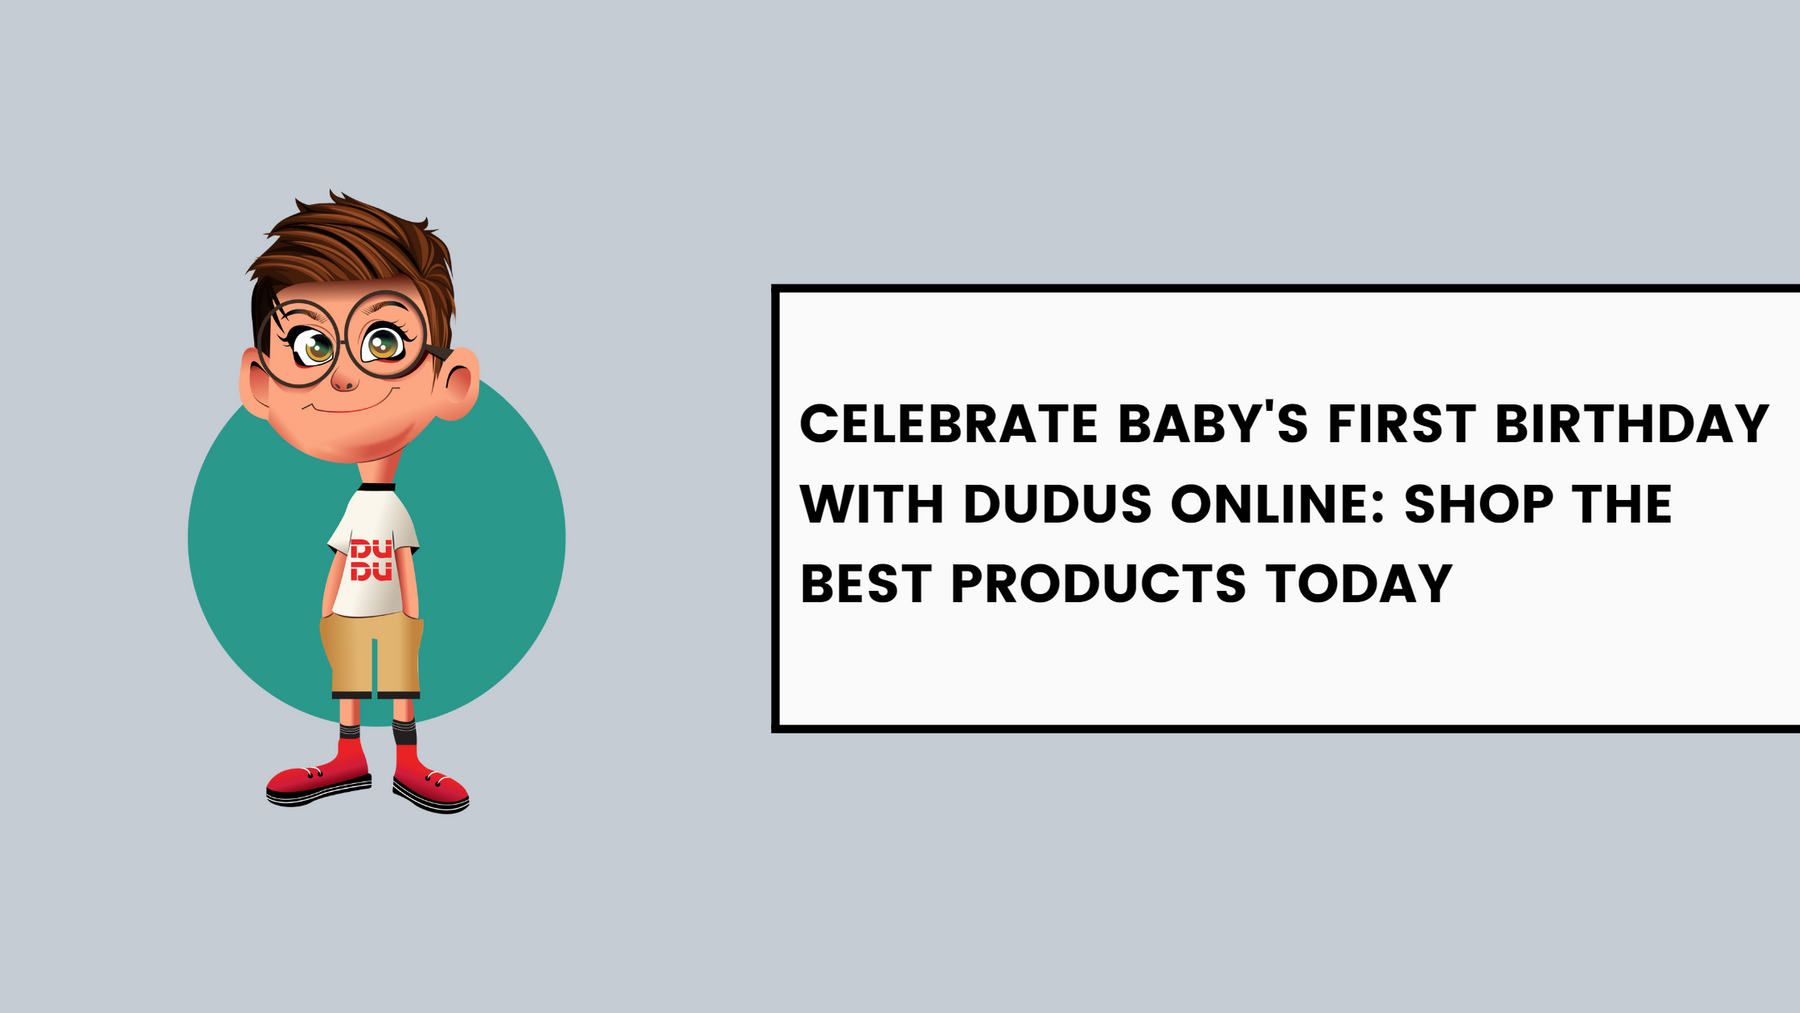 Celebrate Baby's First Birthday With Dudus Online: Shop The Best Products Today